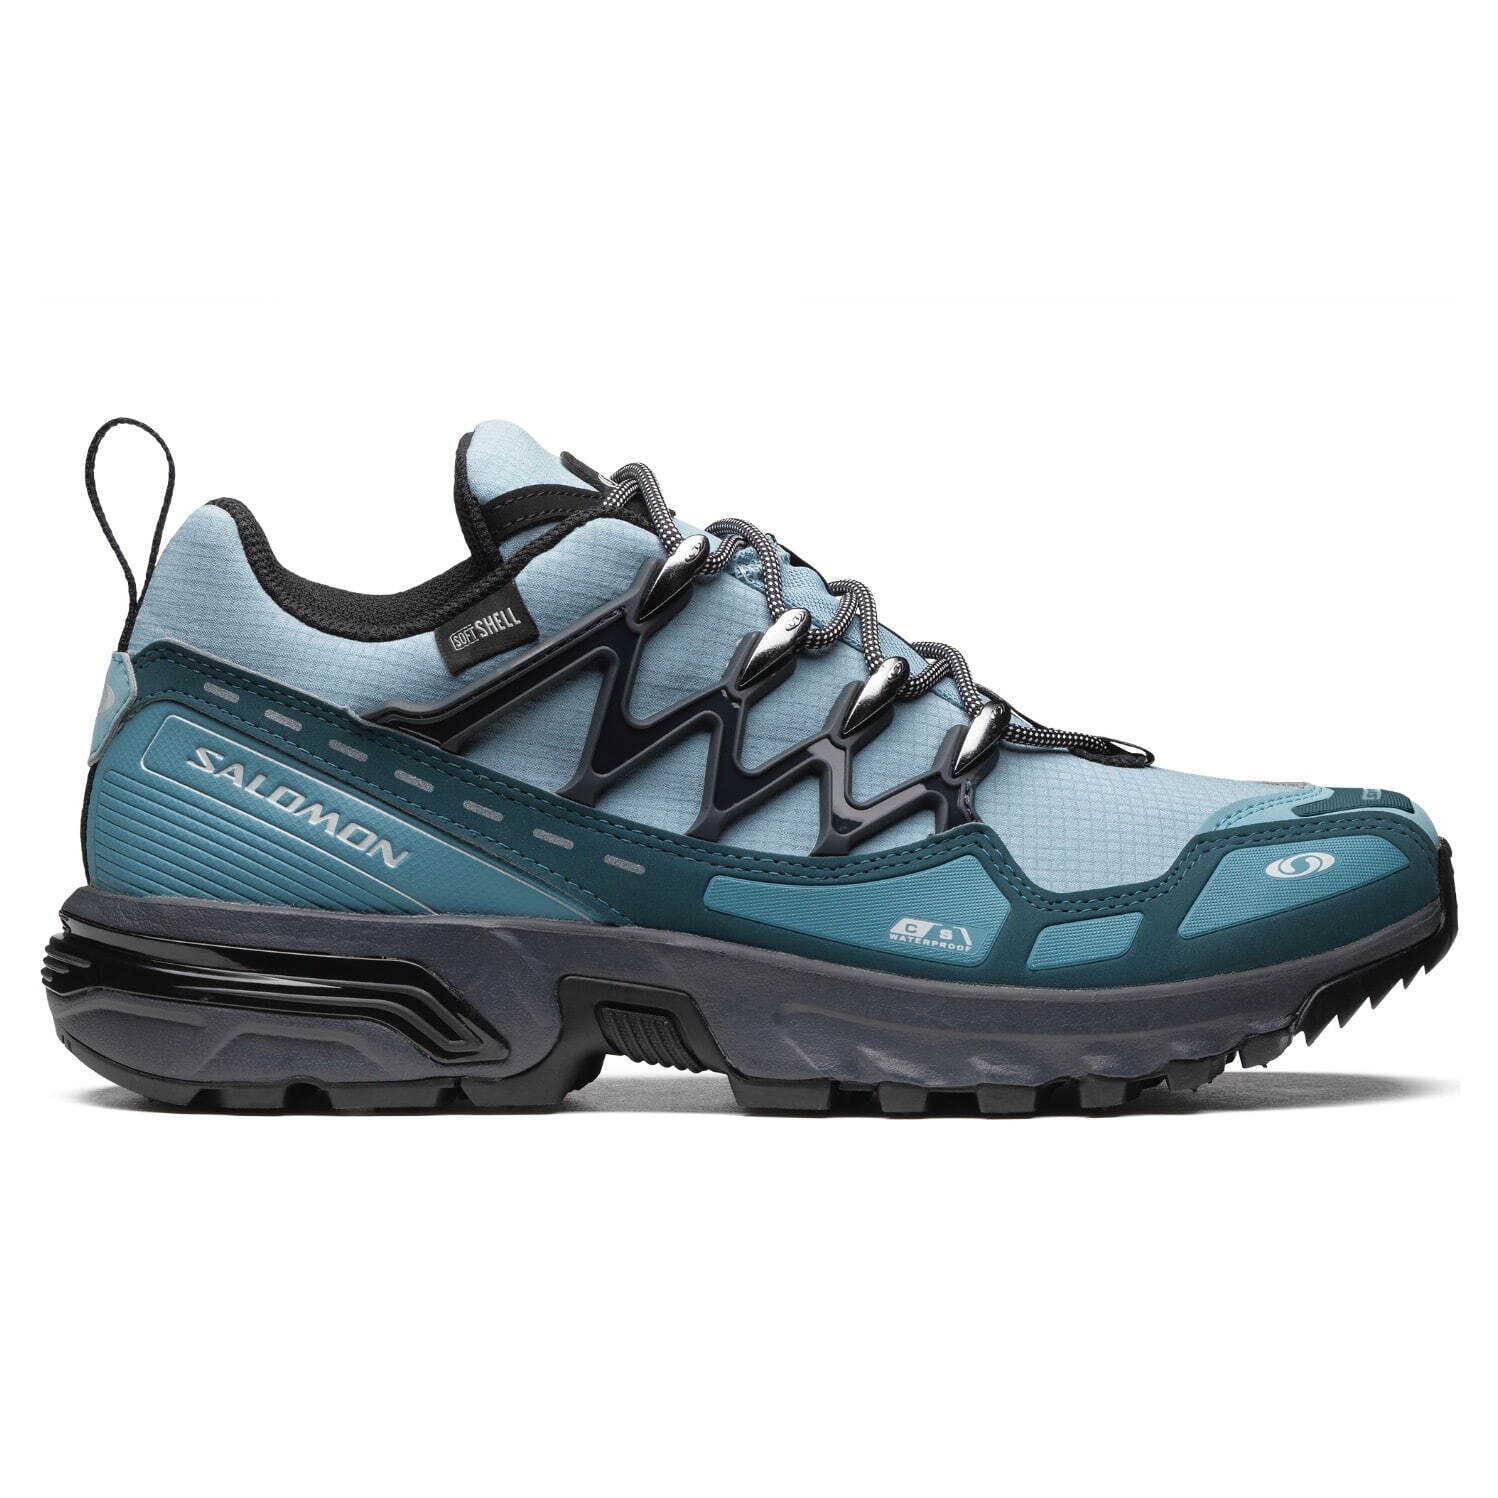 Salomon's ACS+CSWP Shoe Is Quietly Technical, Highly Wearable